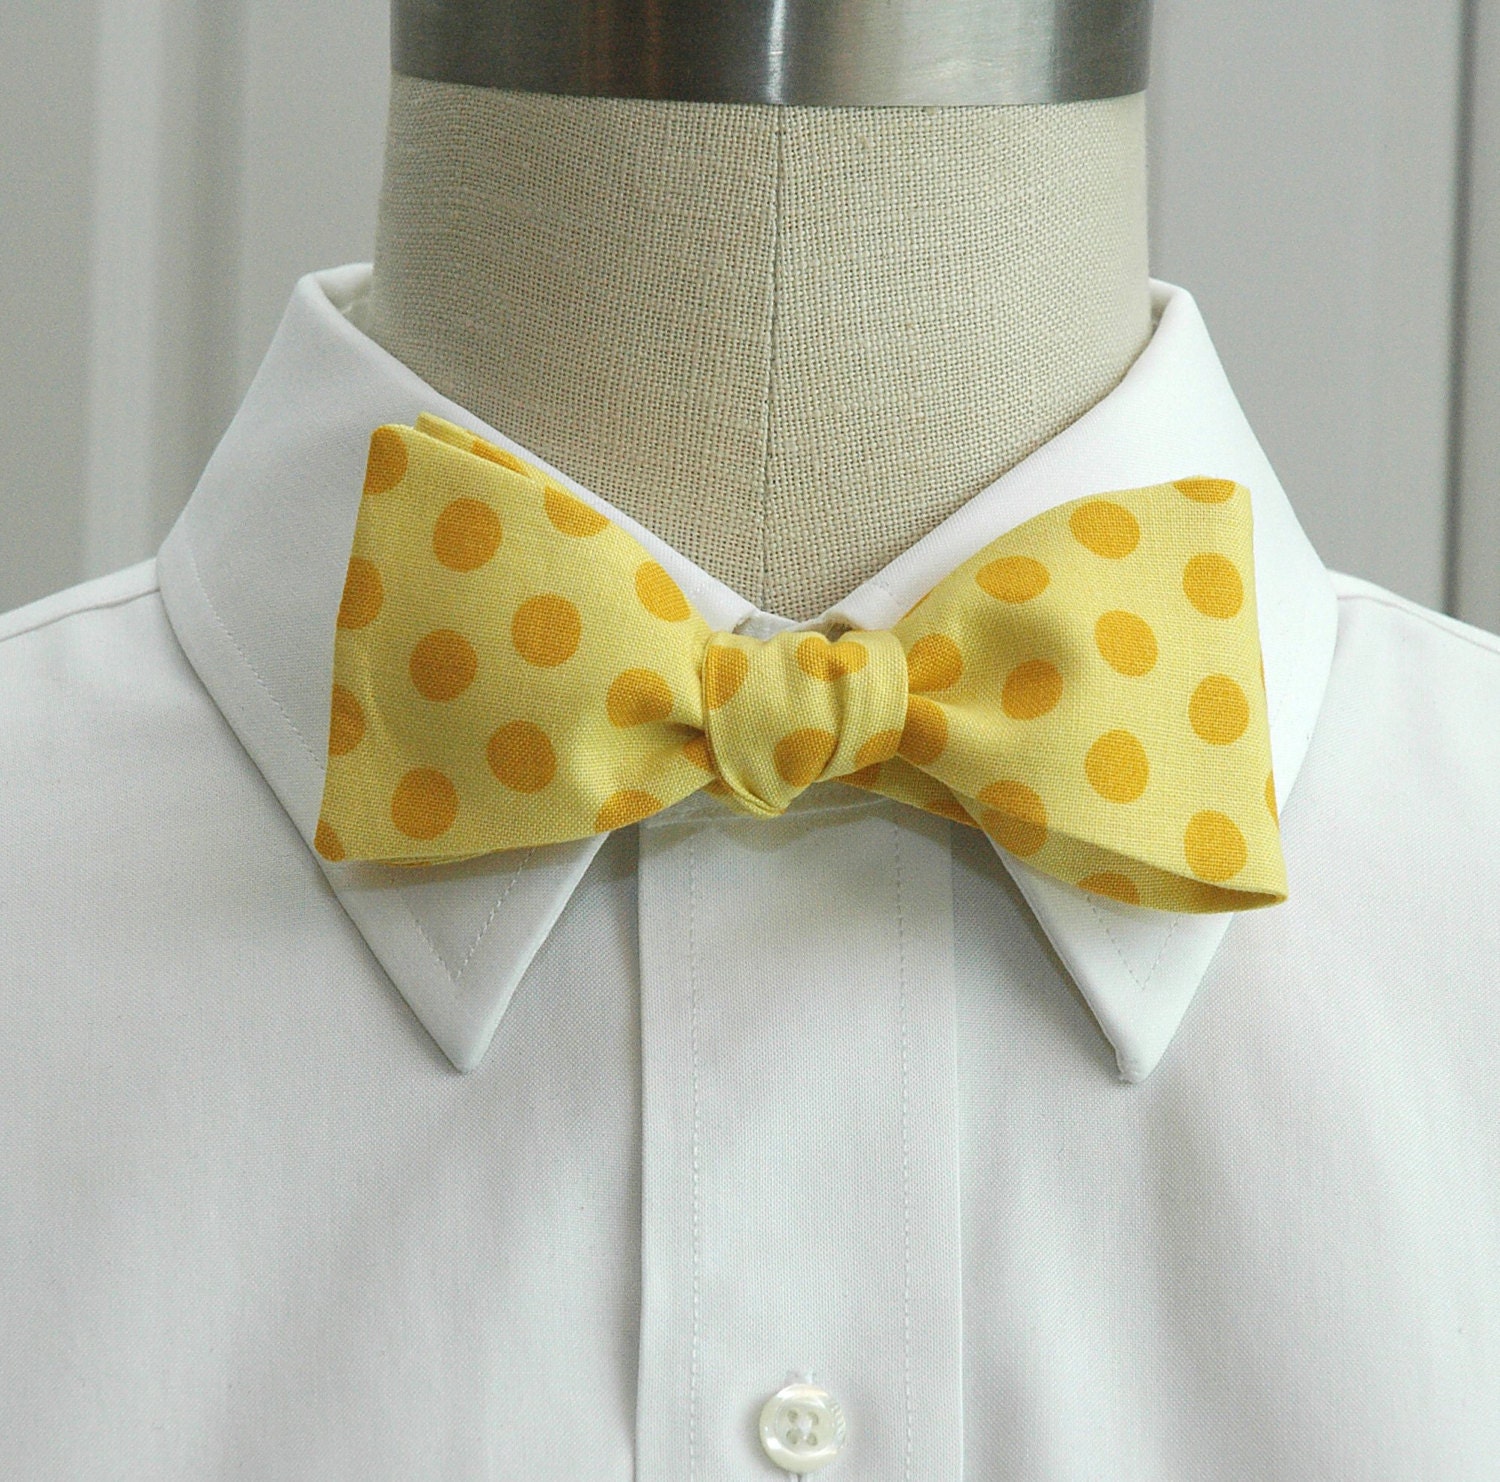 Bow Tie, yellow with gold polka dots, sunshine bright yellow bow tie ...